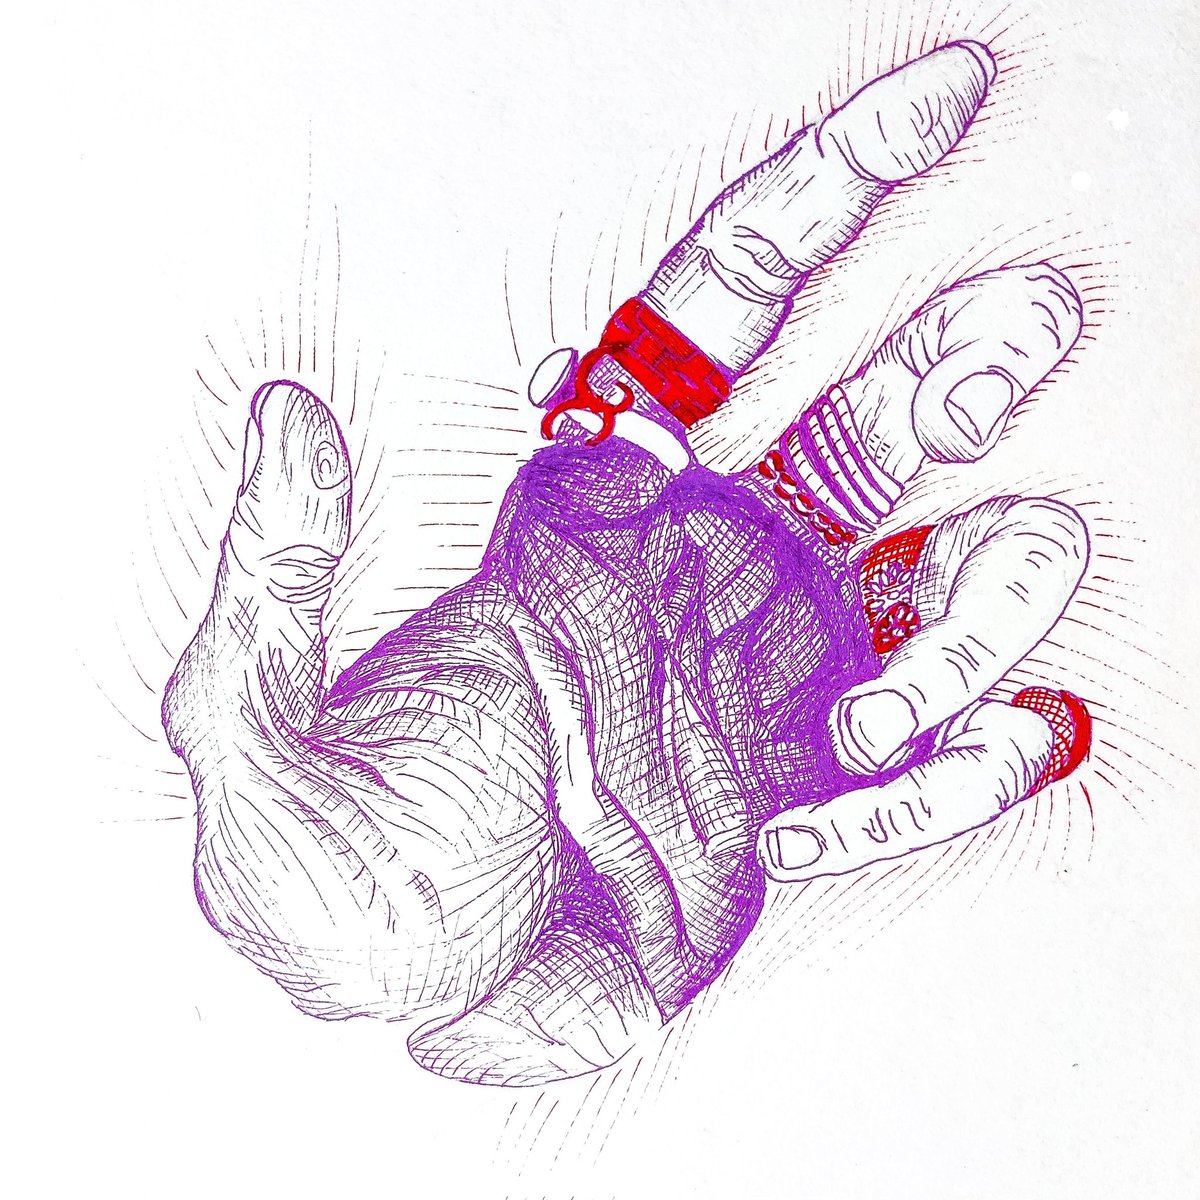 ✨🔮Palm Reading left Hand🔮✨ . 🕉️👋🏻🌒🪬🌘👋🏻🕉️ . ✒️ 🪷Ink on paper 🪷✒️ . 1/1 Edition........ . . . 17 ꜩ #Tezos ... 🖇️Link below🖇️